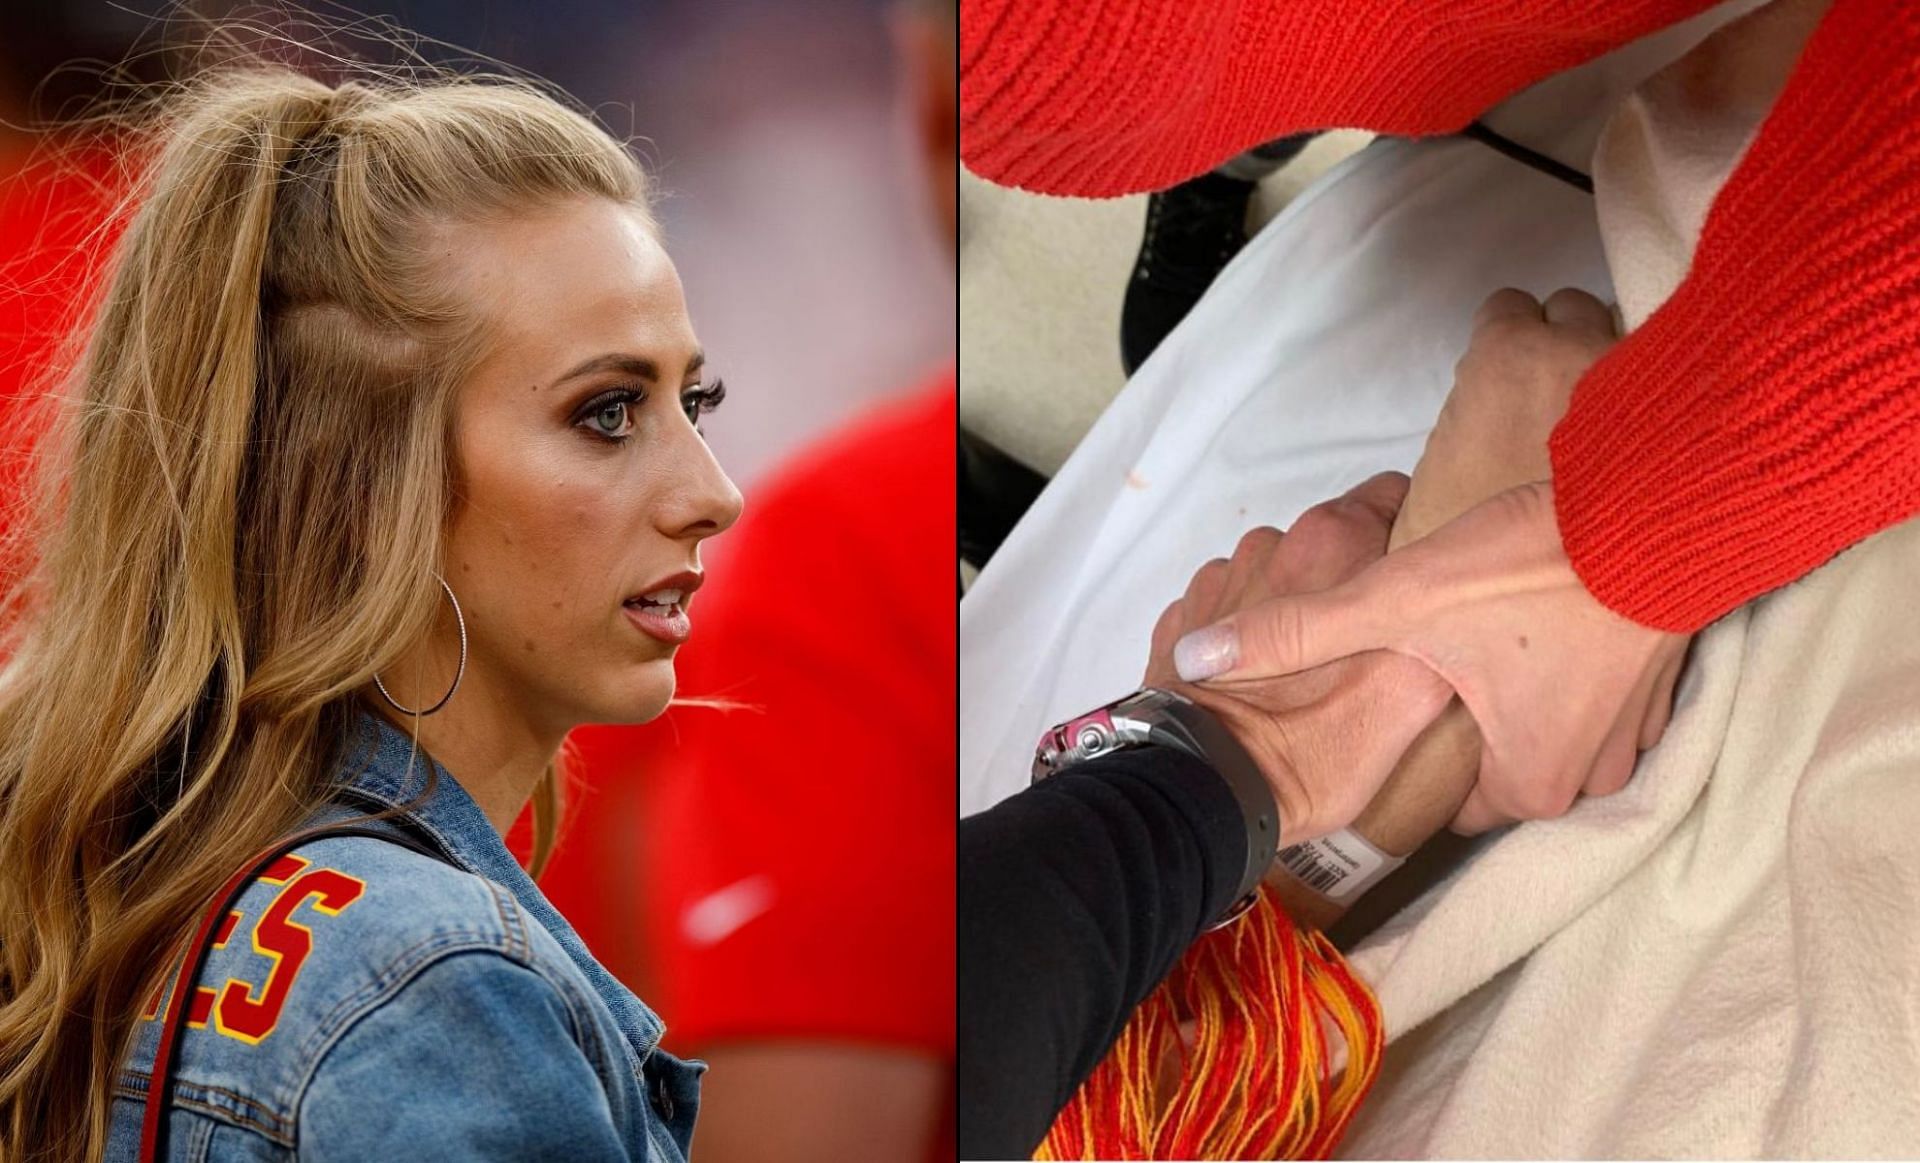 Patrick Mahomes wife Brittany told she's 'gorgeous' by adoring fans while  showing off 'perfect' outfit at Chiefs game